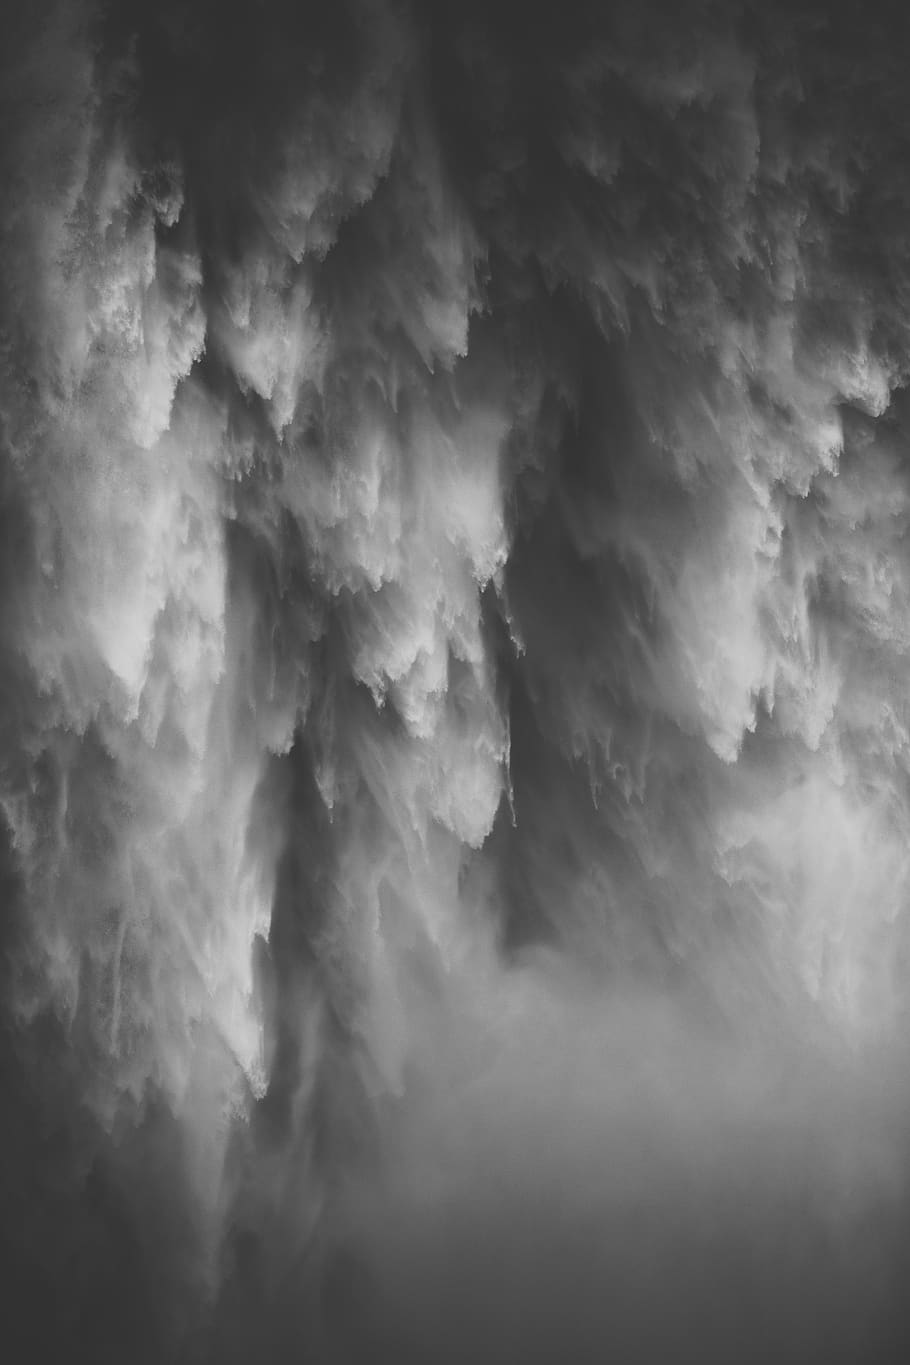 waterfalls, water, cascade, black and white, flowing, landscapes, falls, wet, outdoors, scenery